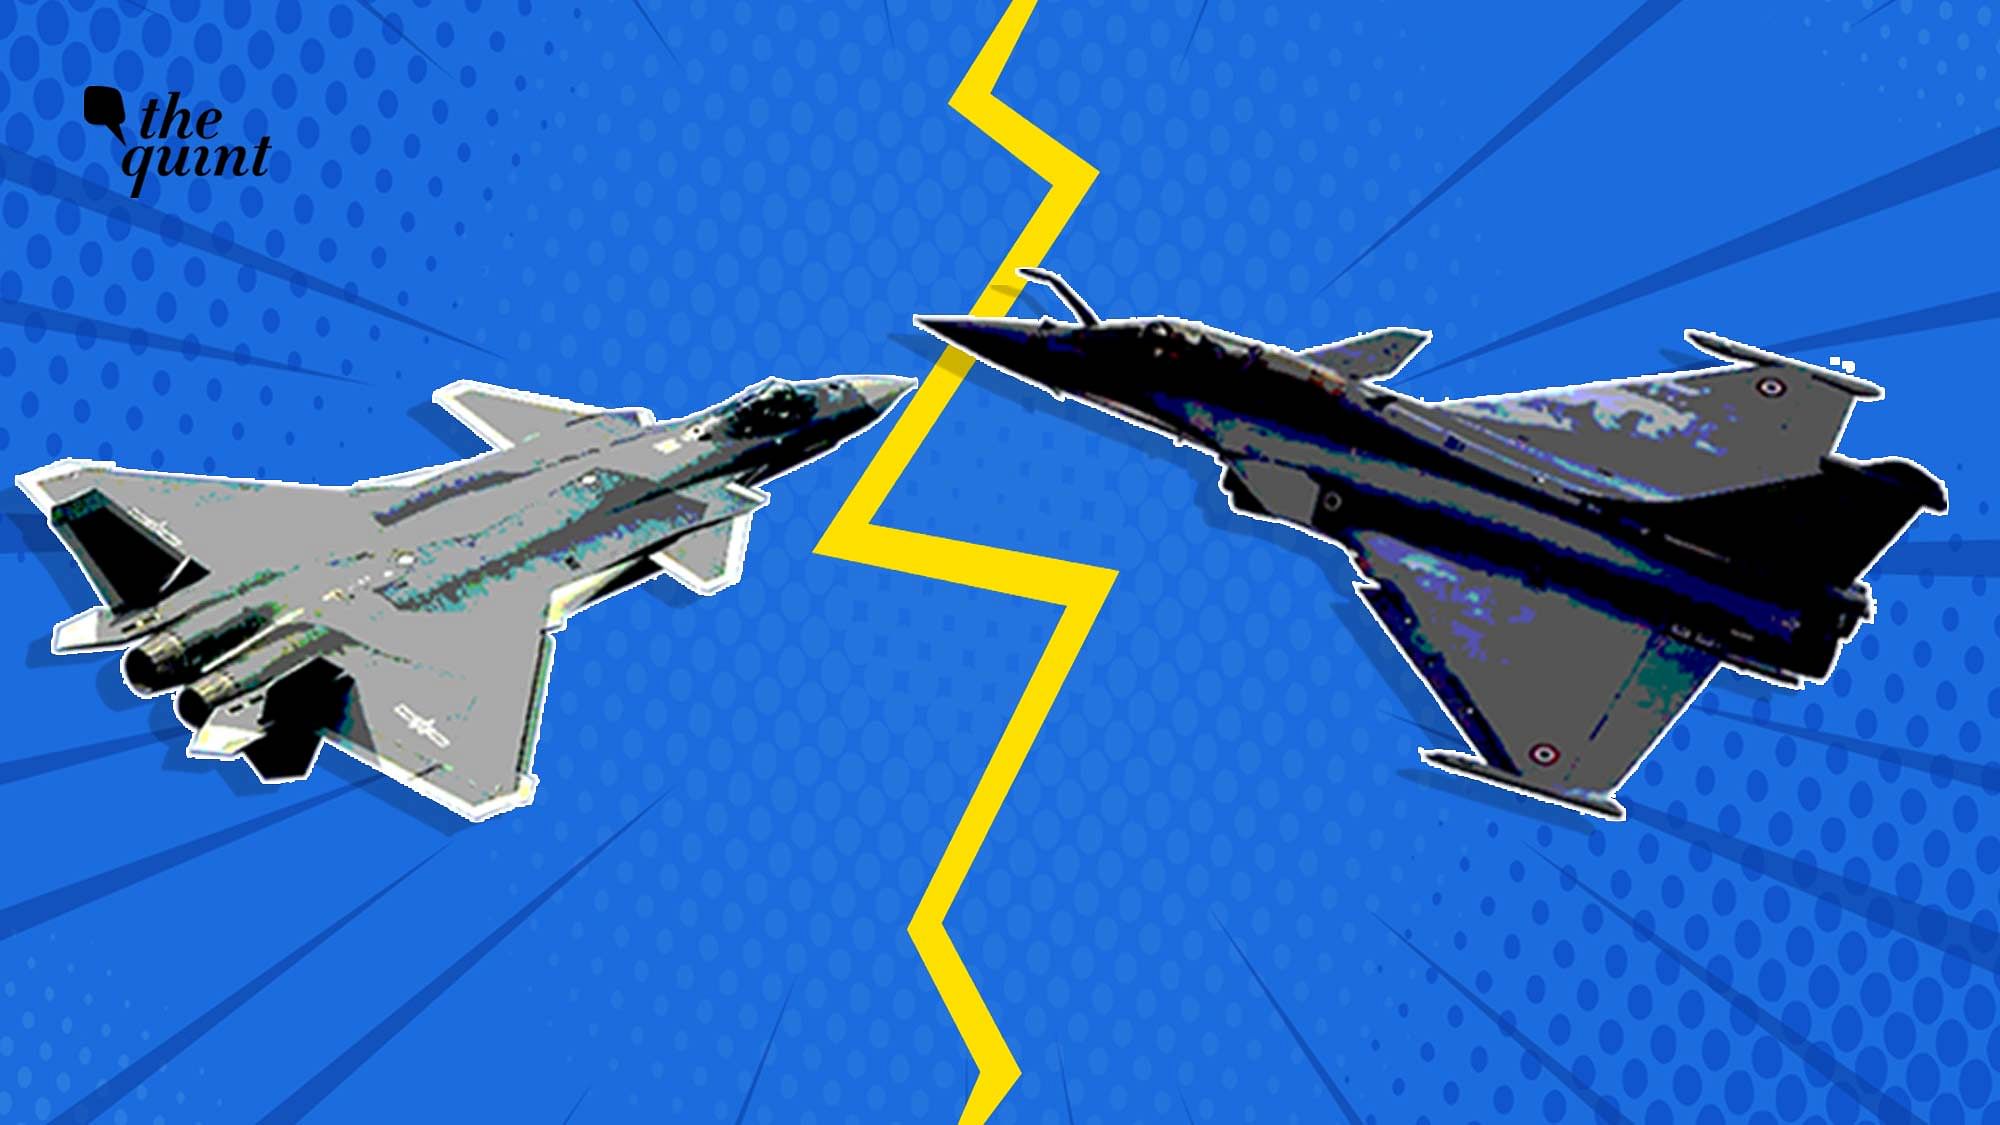 The French Dassault Rafale is about to be inducted into the Indian Air Force. It will be the IAF’s most advanced fighter aircraft. Across the LAC, it has to take on China’s Chengdu J-20. Here is a head-to-head comparision.